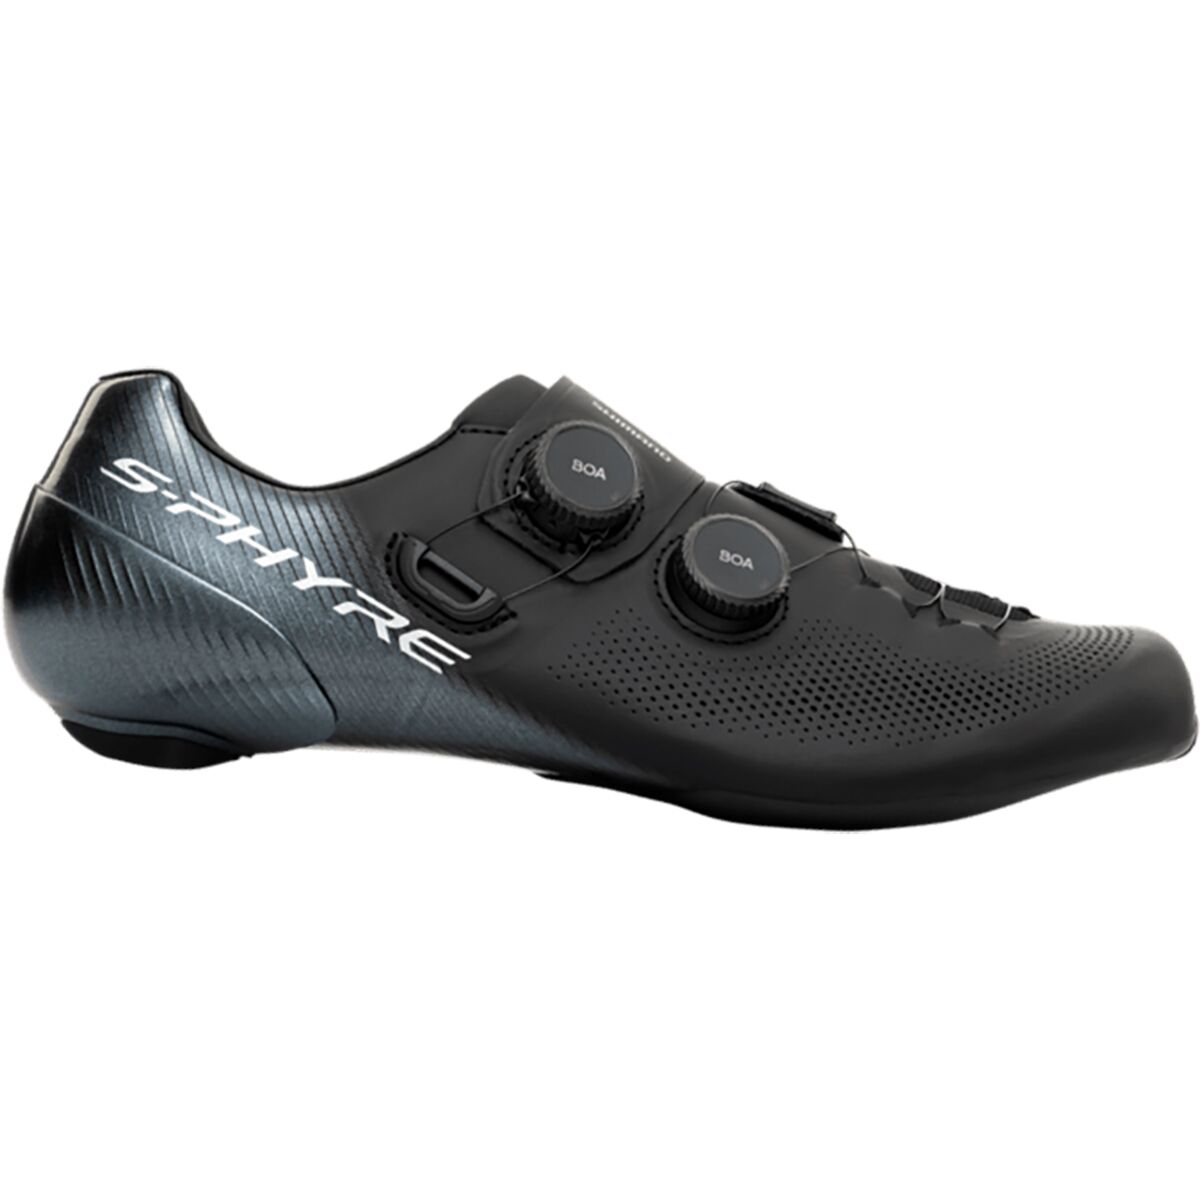 Shimano RC903 S-PHYRE Wide Cycling Shoes - Men's